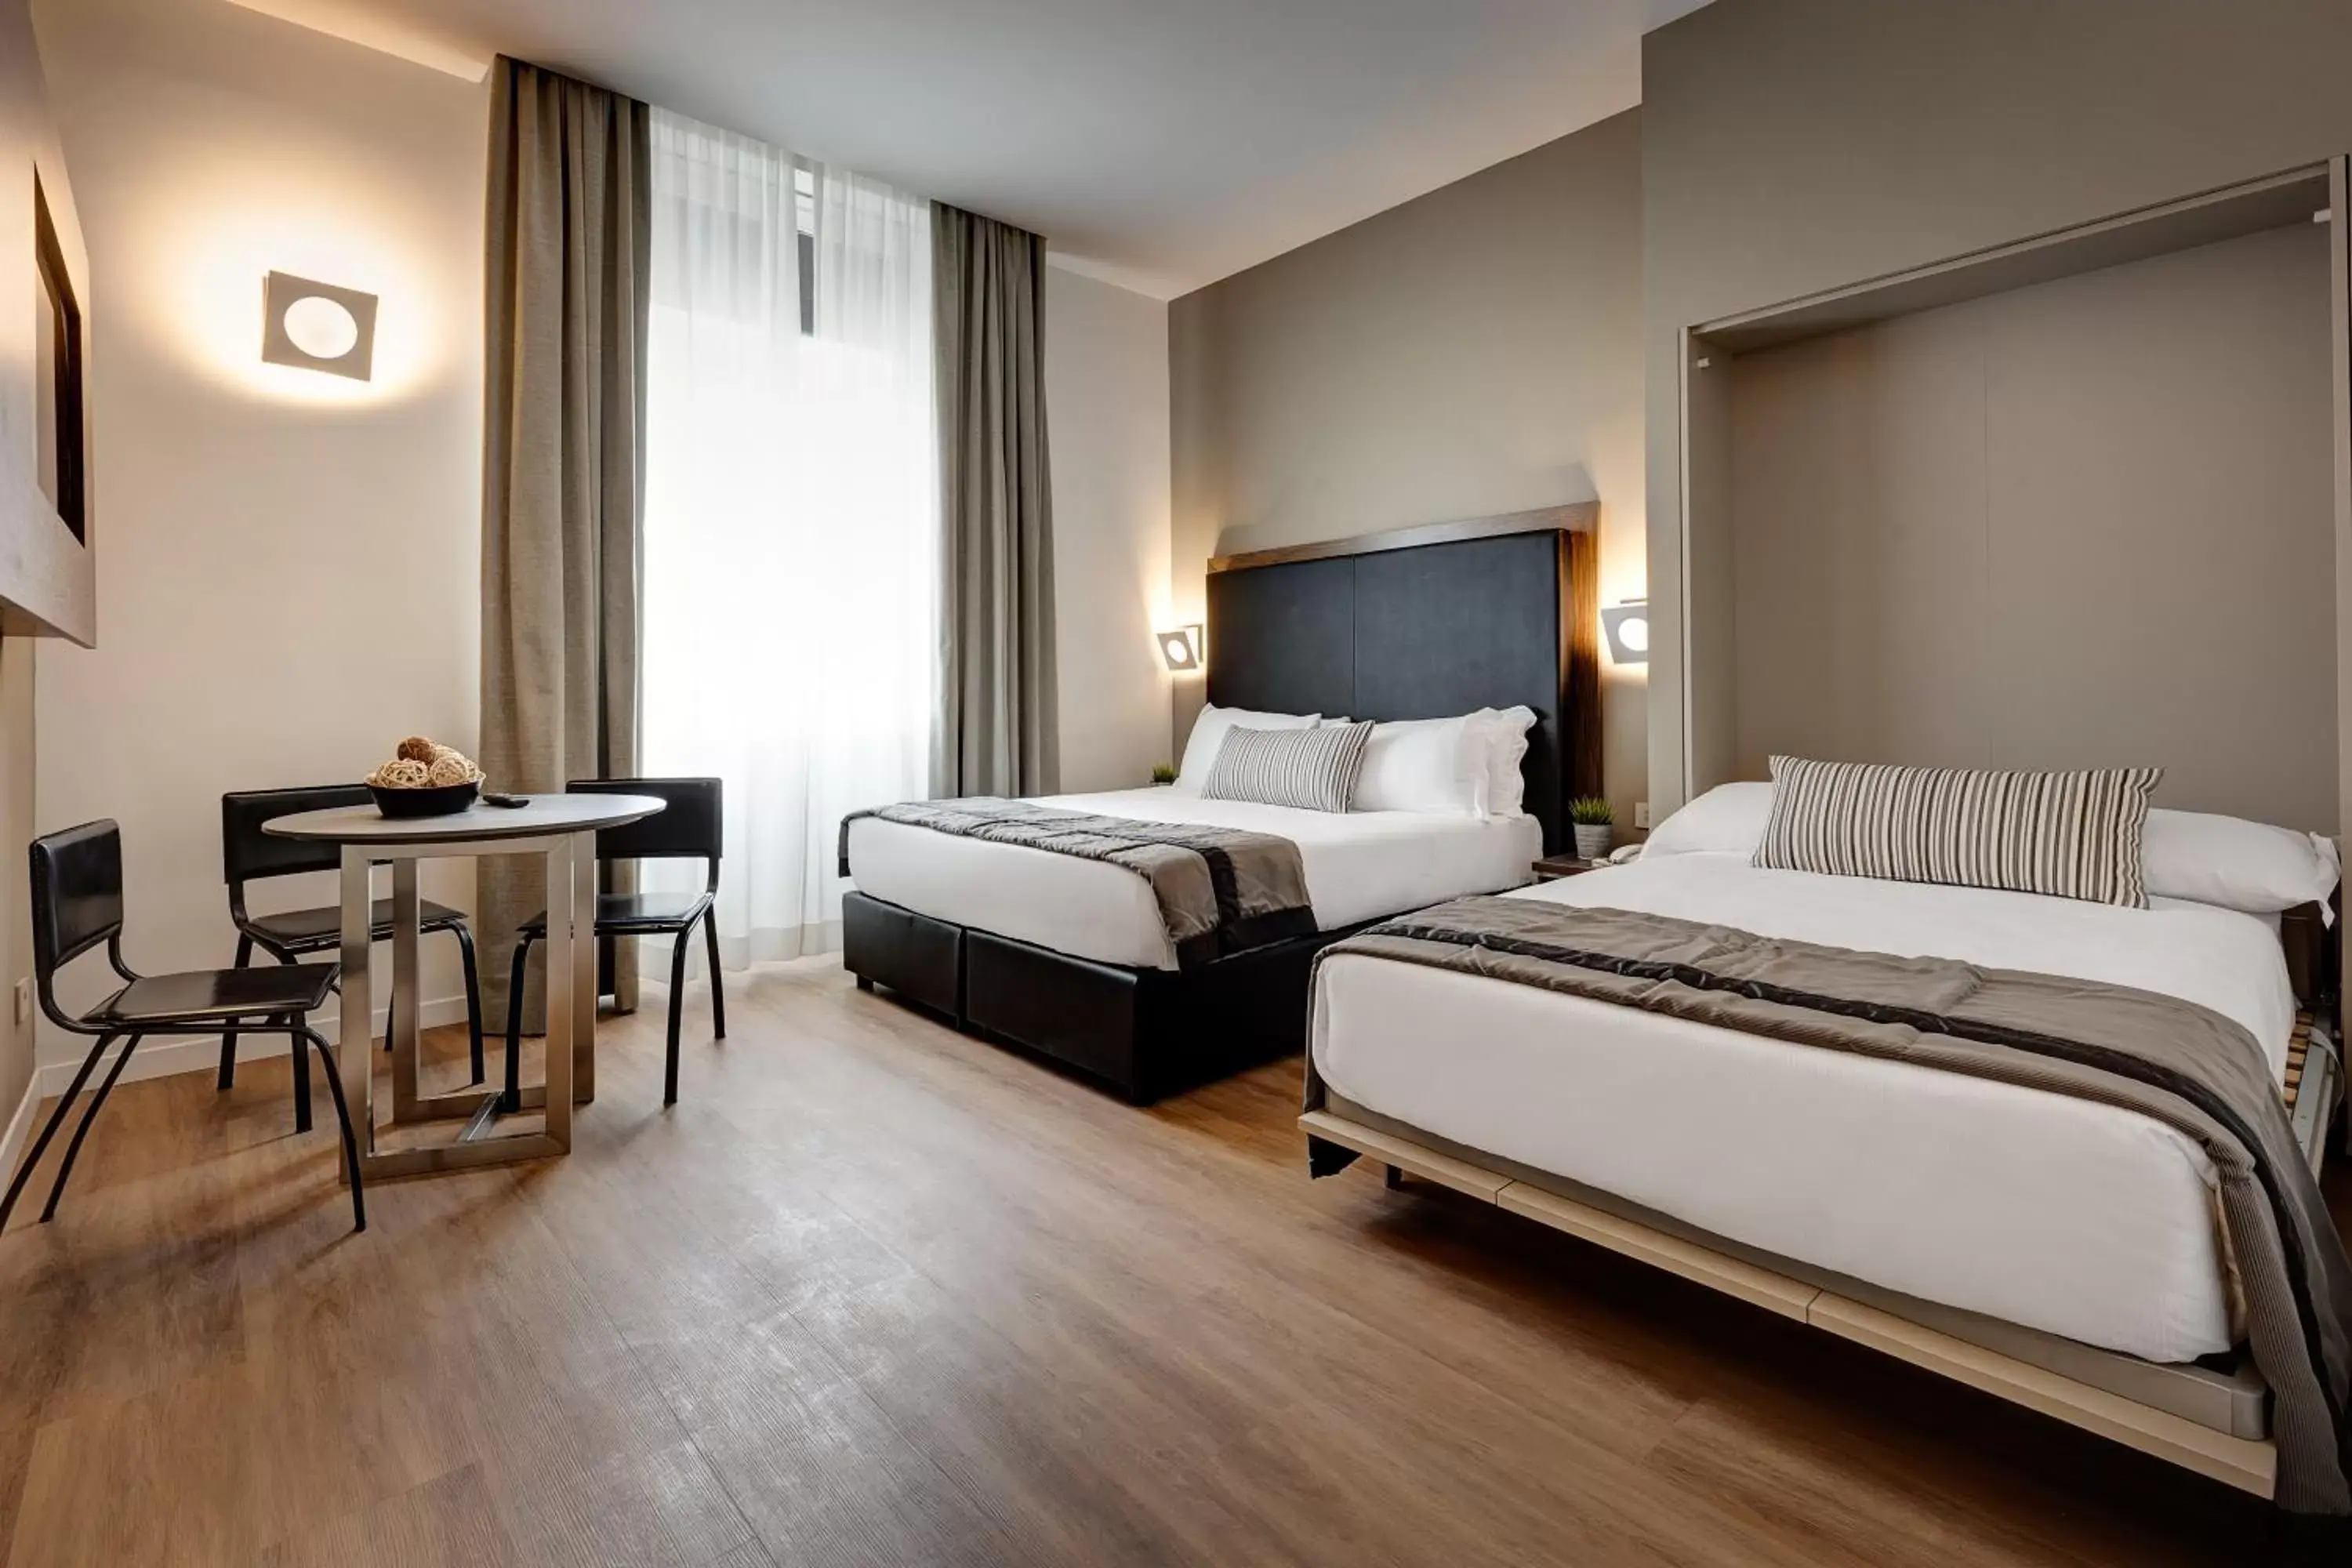 Bed in Rome Art Hotel - Gruppo Trevi Hotels